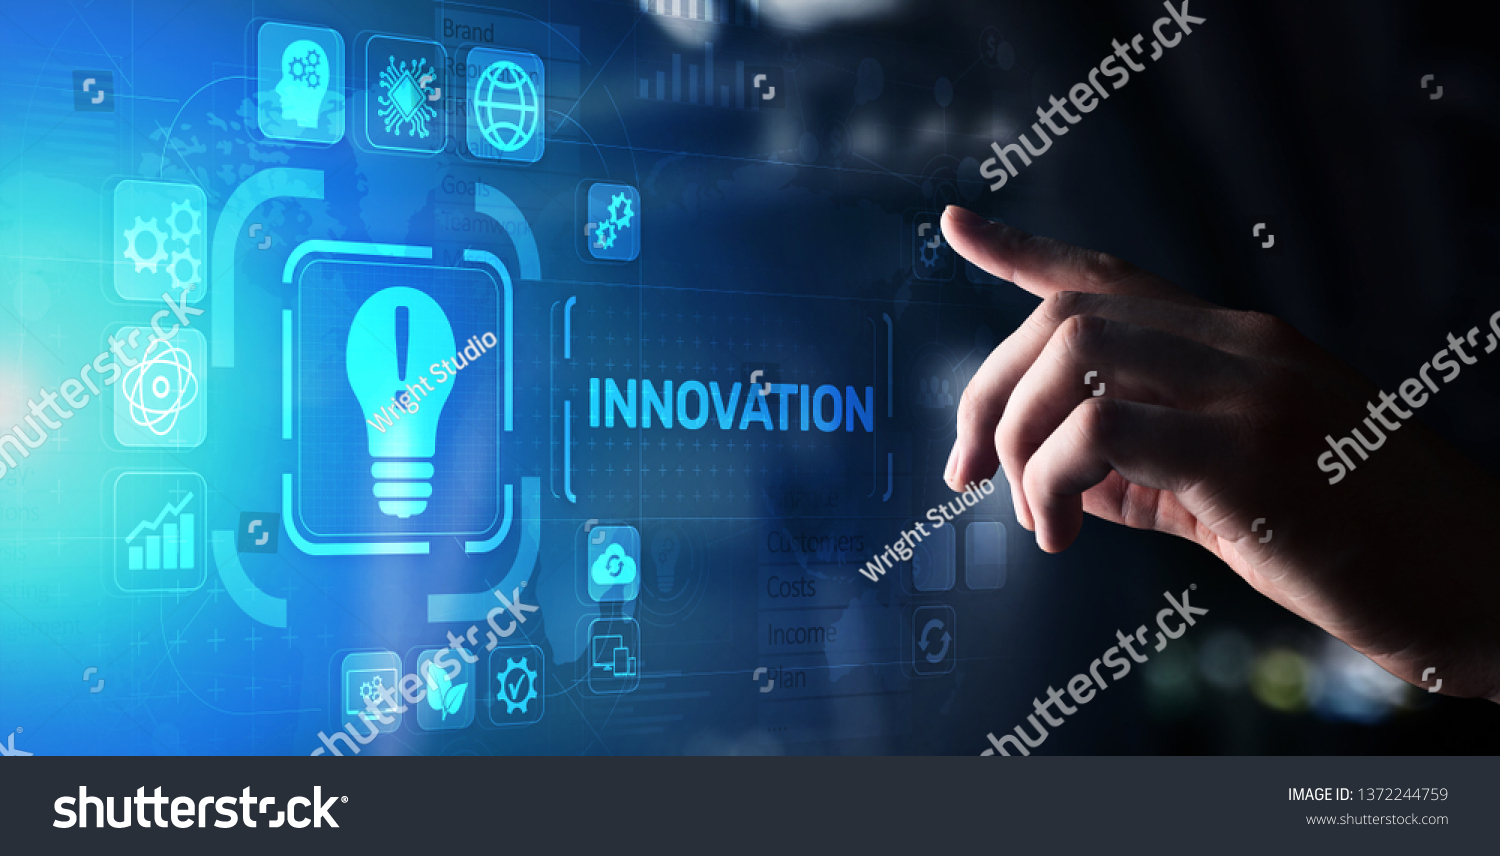 Innovation business and technology concept on virtual screen. Innovate creative process. #1372244759